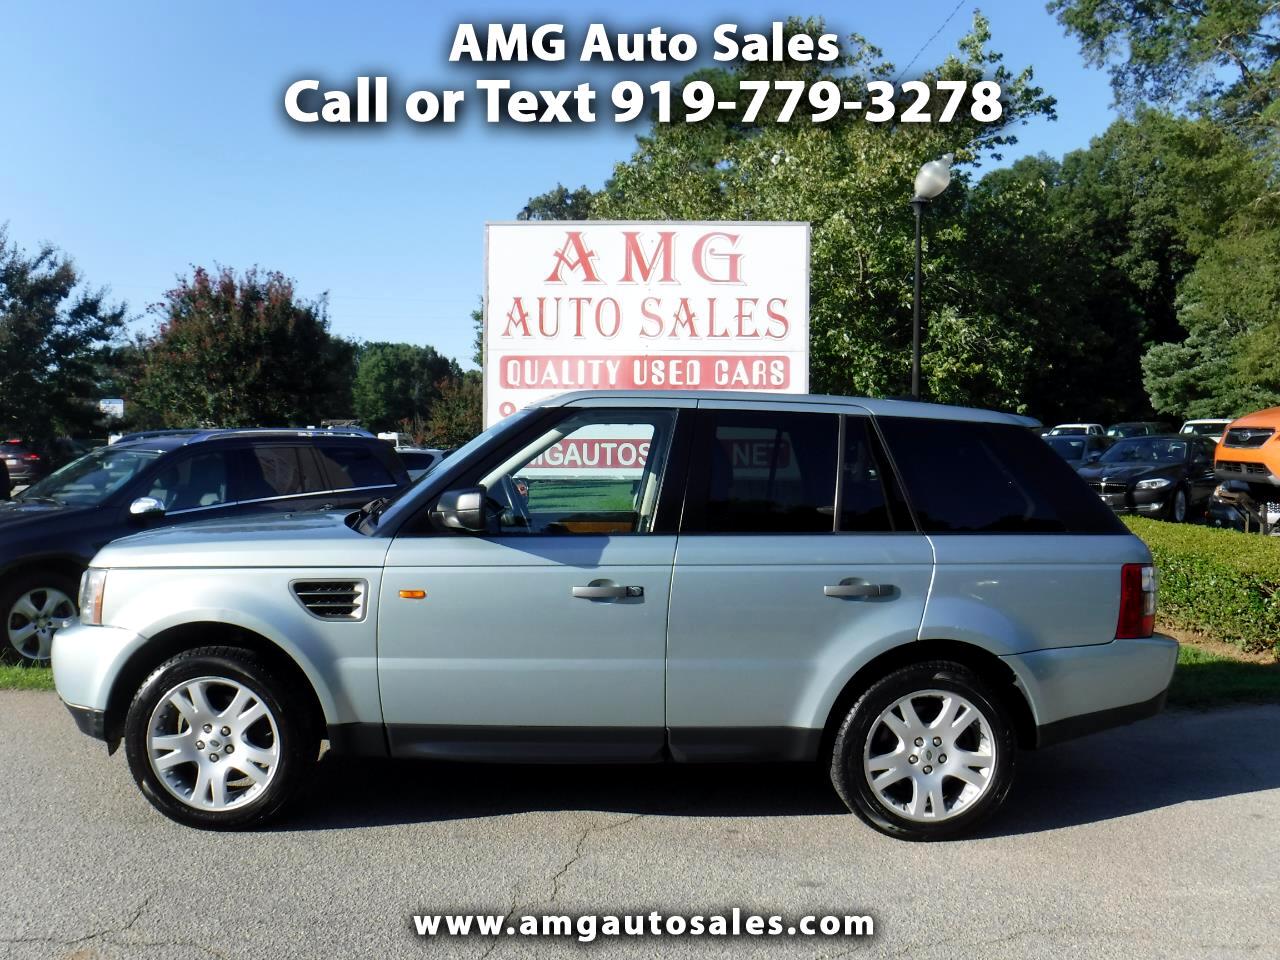 Used 2006 Land Rover Range Rover Sport Hse For Sale In